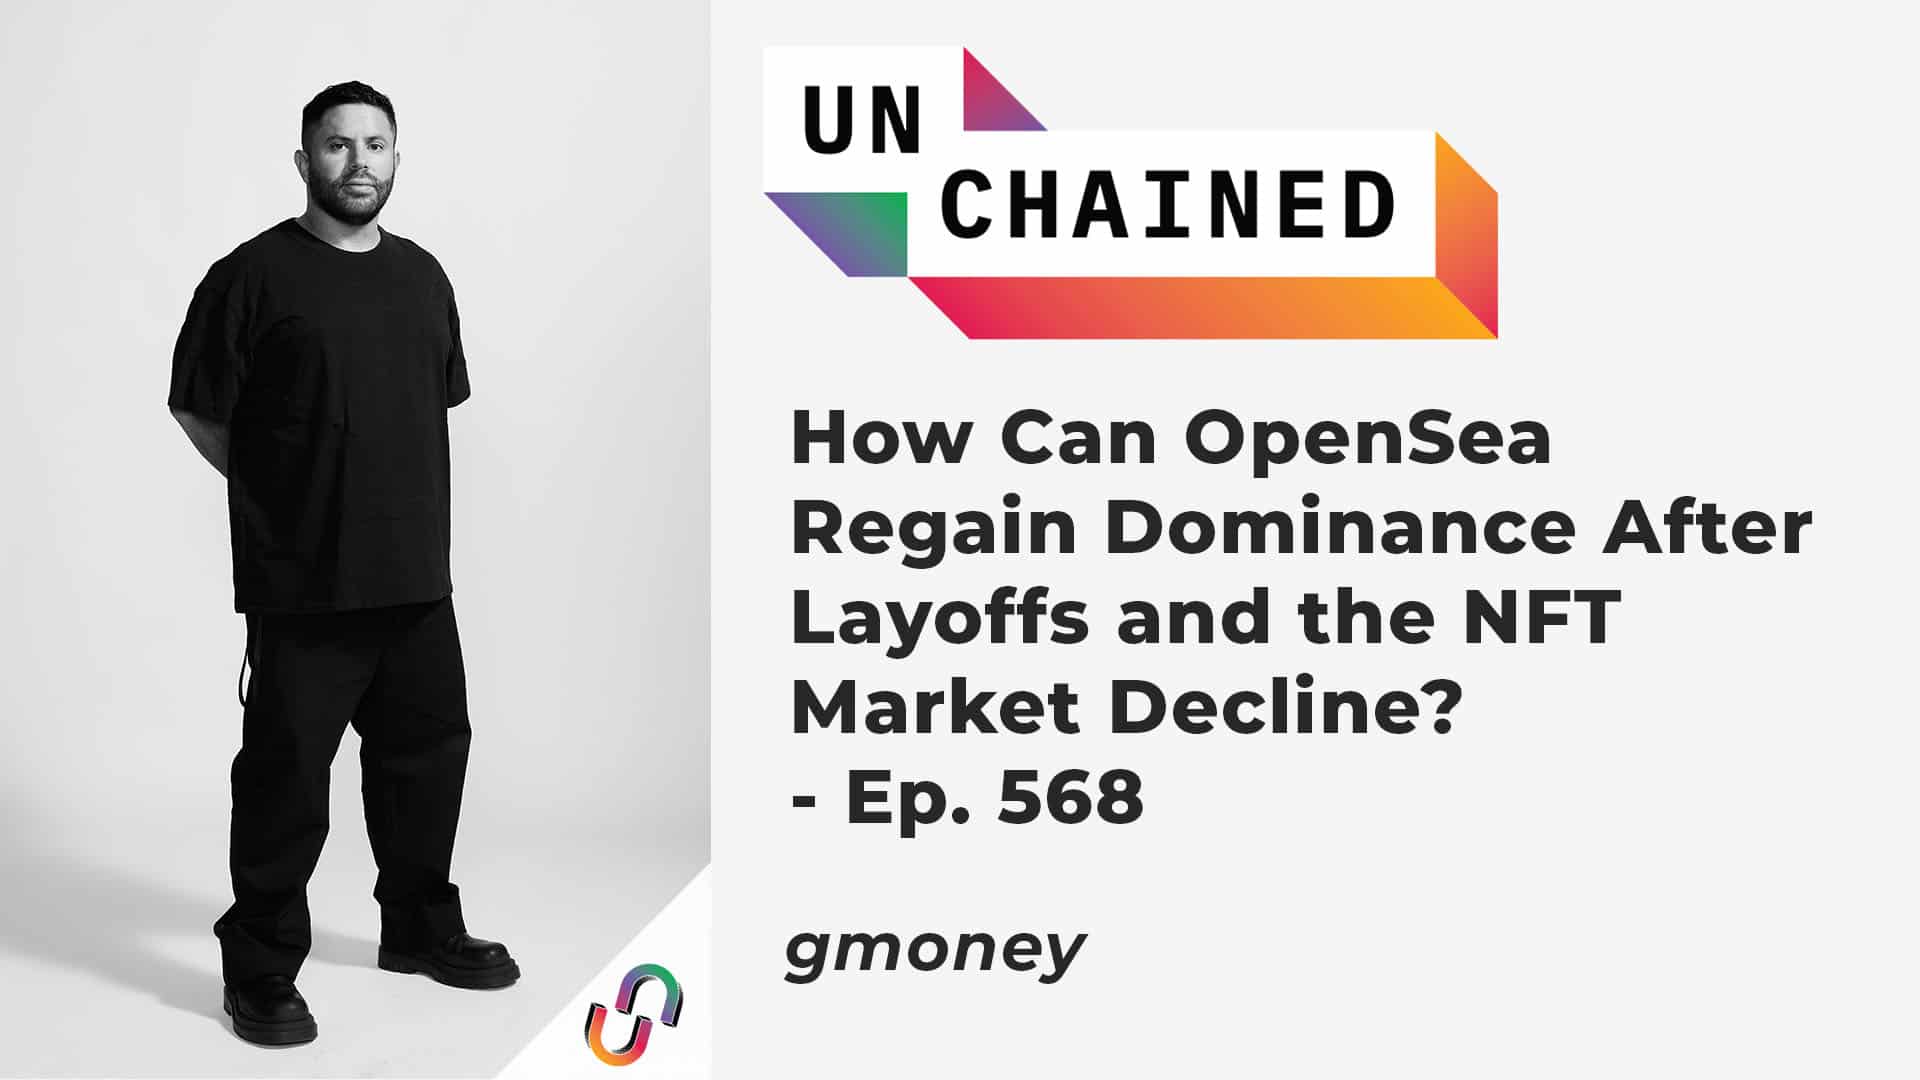 How Can OpenSea Regain Dominance After Layoffs and the NFT Market Decline? - Ep. 568